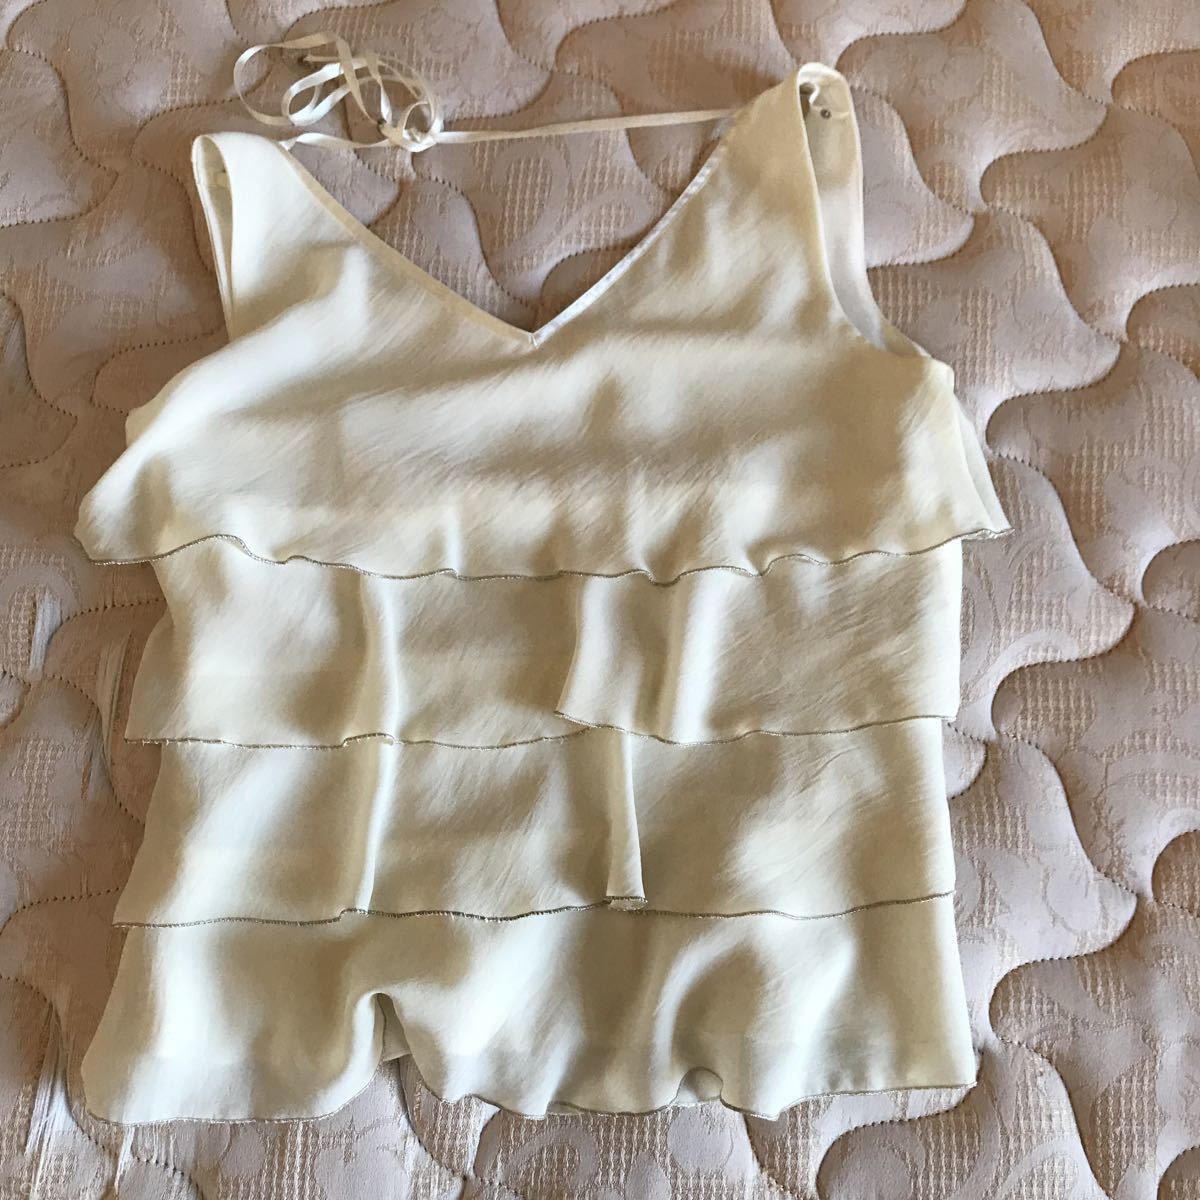 ROPE Rope frill blouse no sleeve ivory M size free shipping 